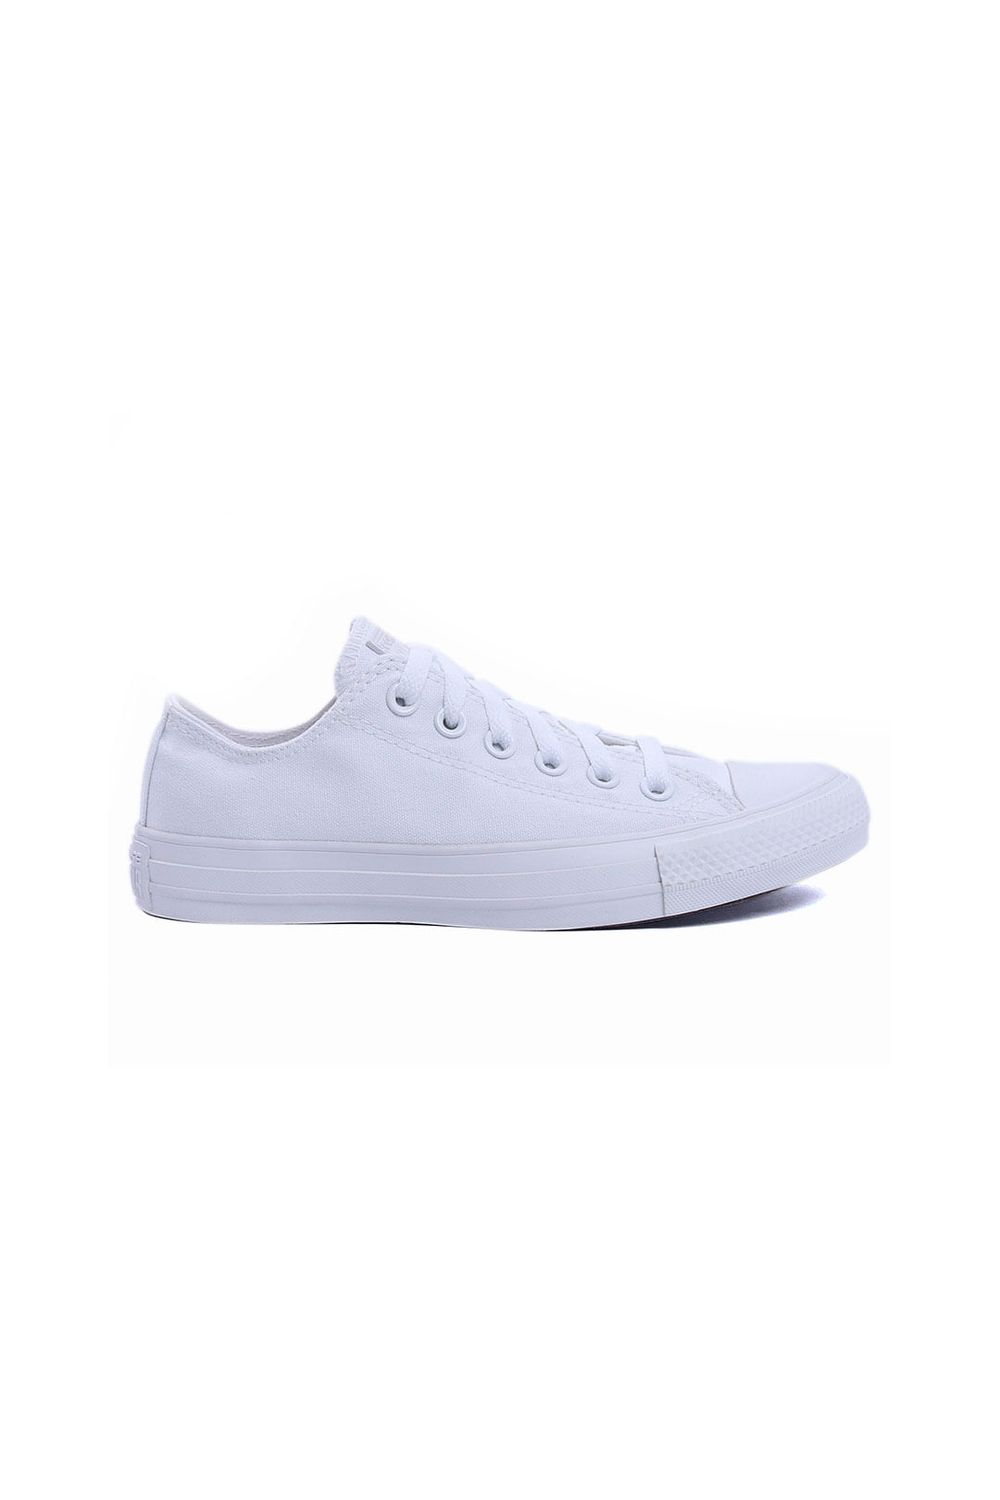 CONVERSE TENIS CASUAL UNISEX CT AS SP OX